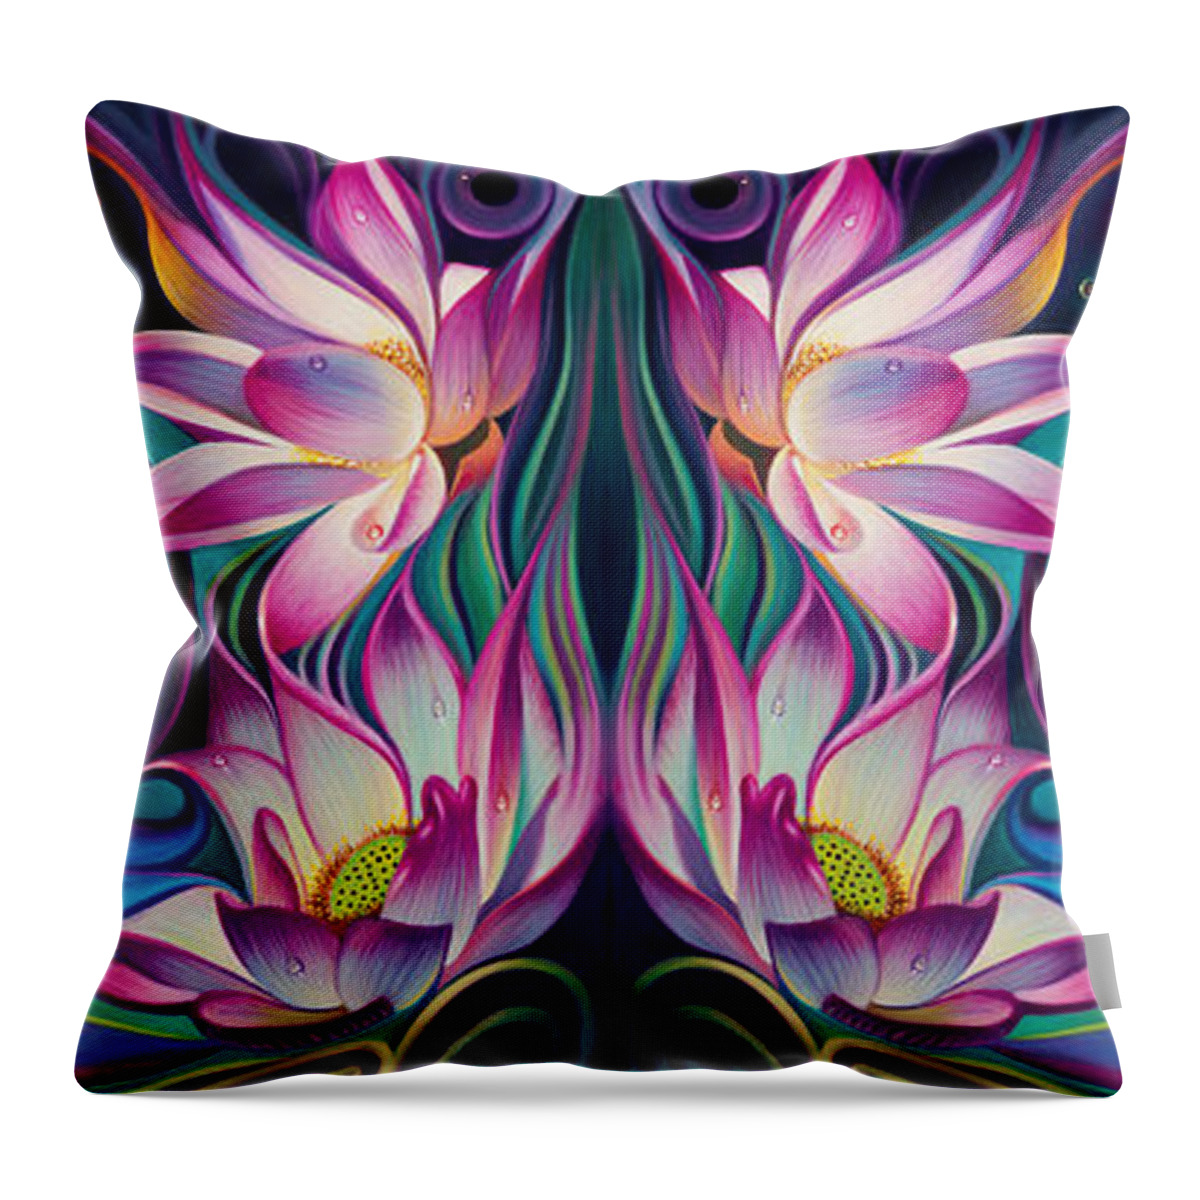 Lotus Throw Pillow featuring the painting Double Floral Fantasy 2 by Ricardo Chavez-Mendez